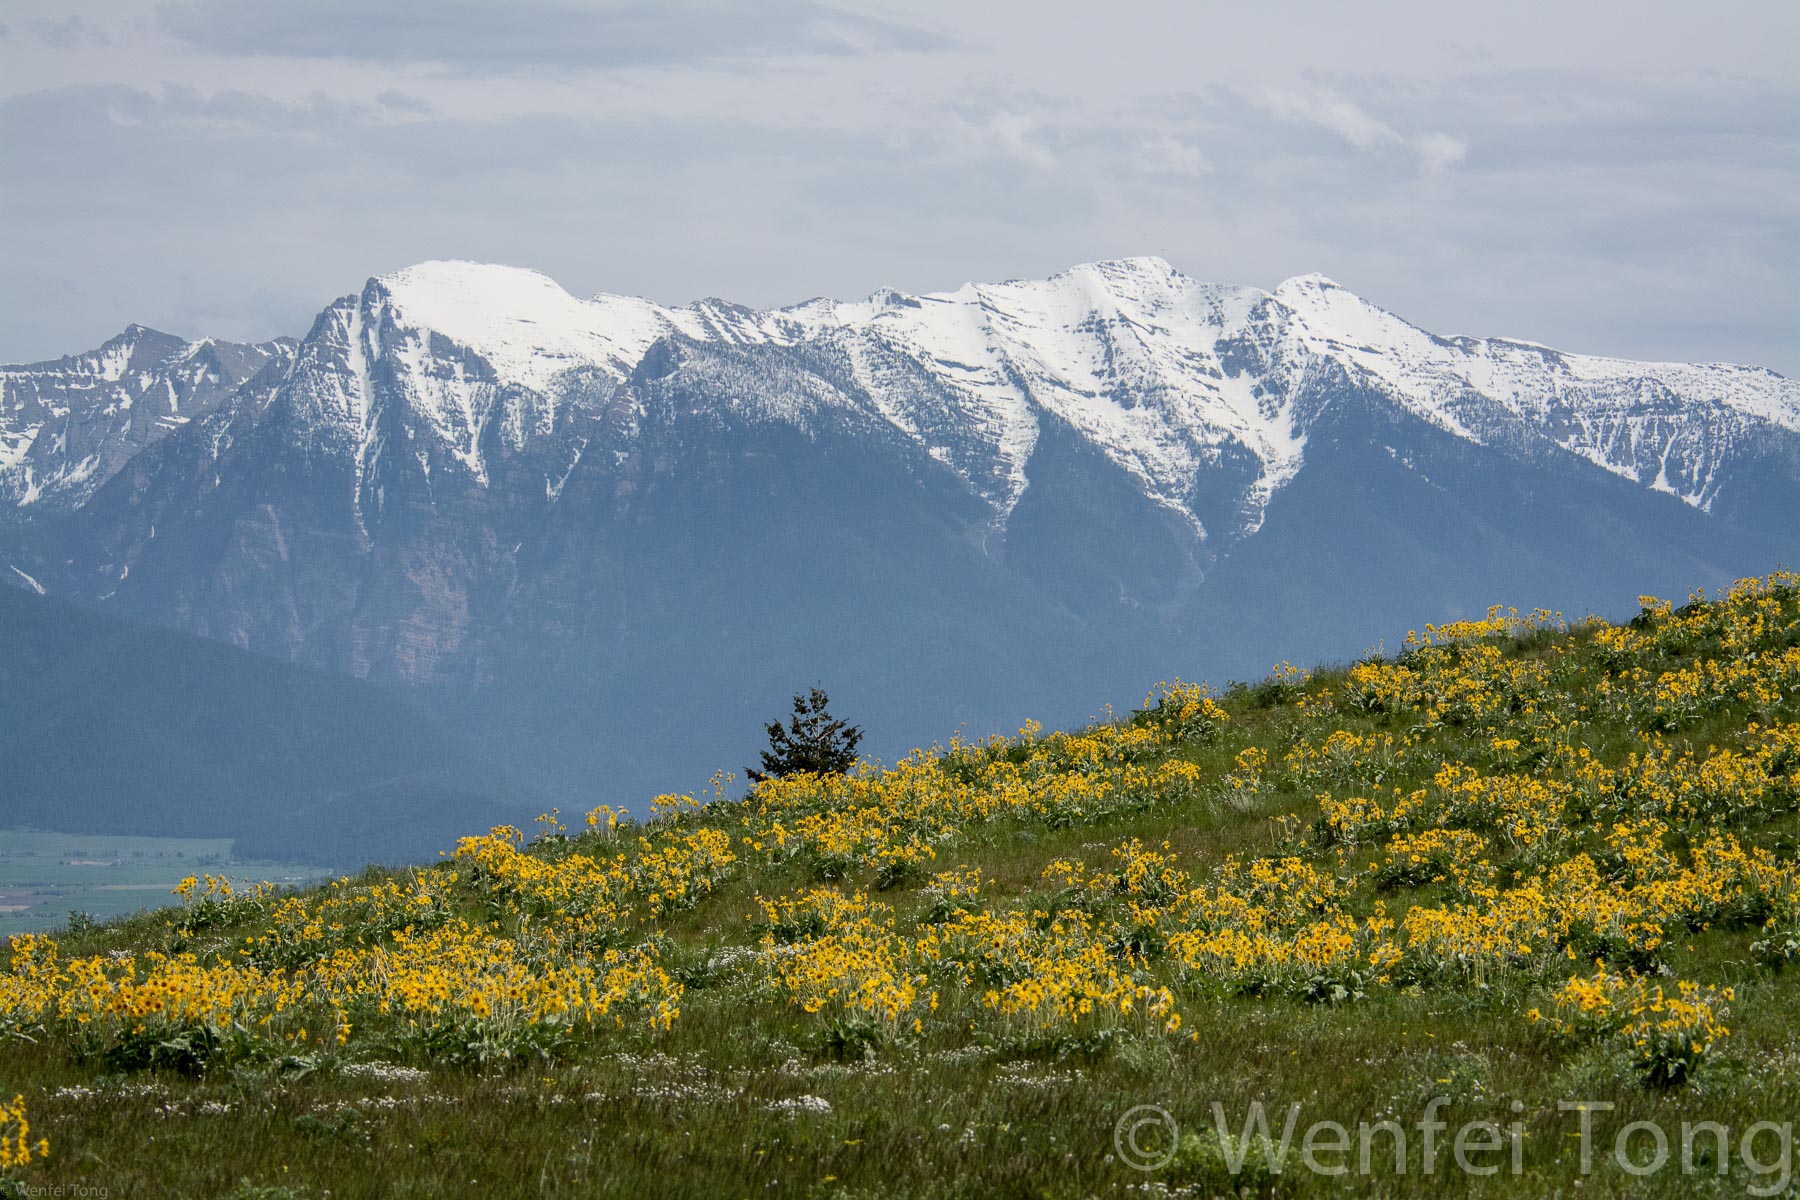 View of the Mission mountains with arrowleaf balsamroot blooming in the foreground